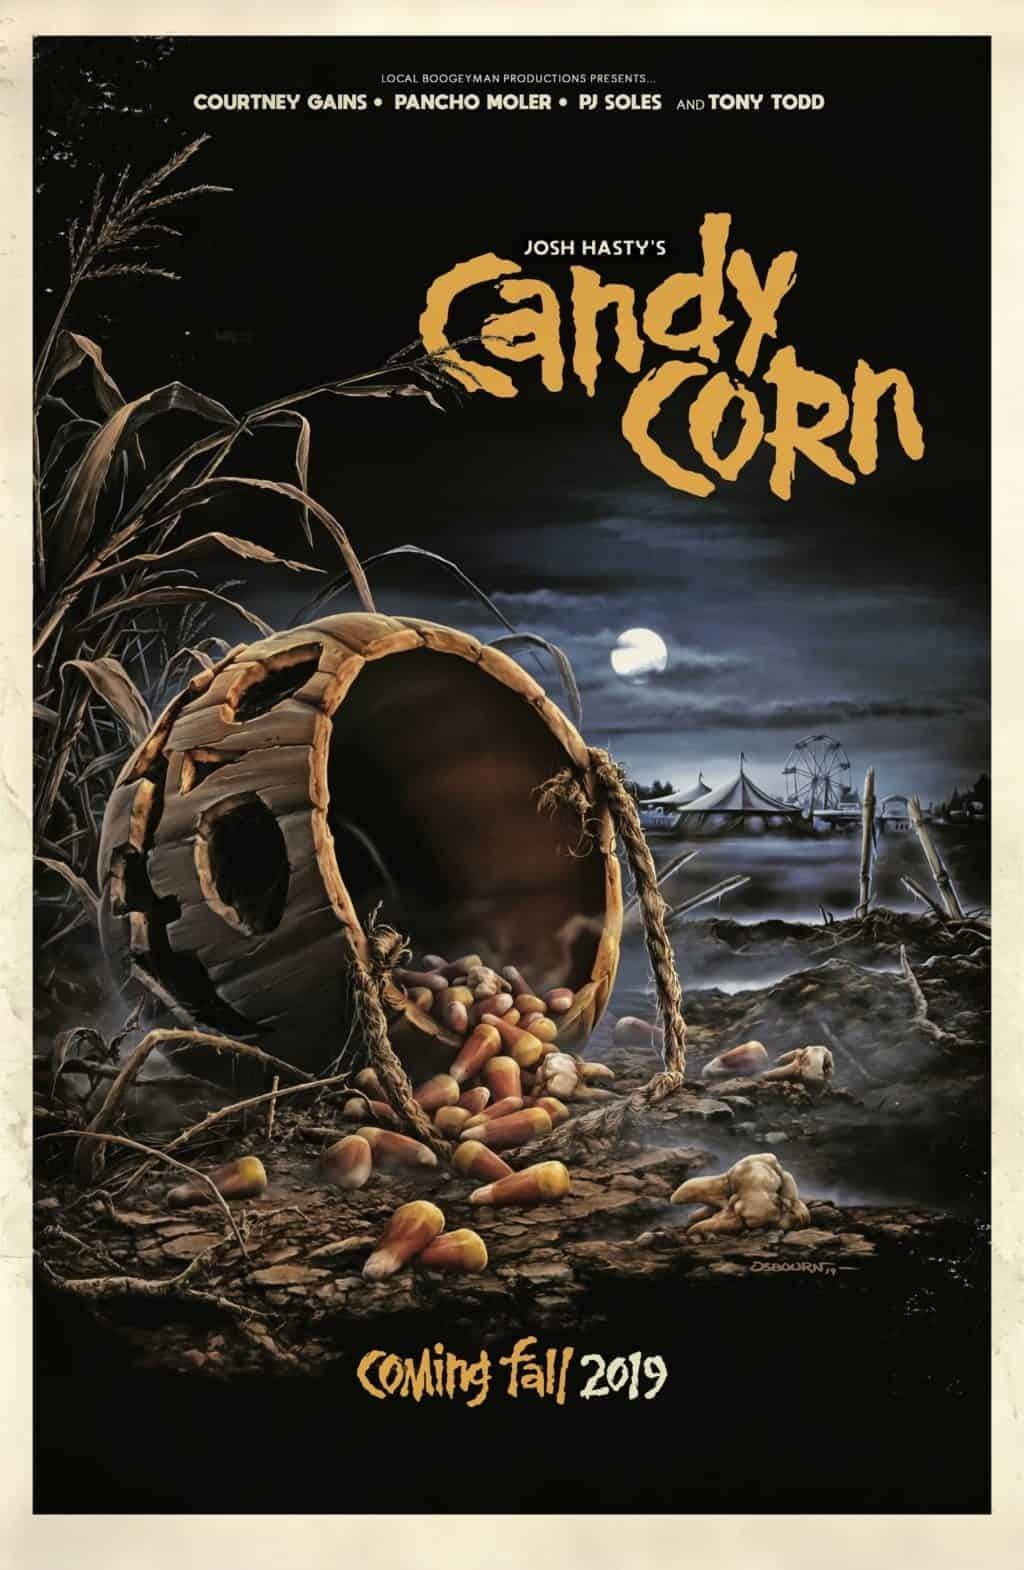 Candy Corn poster